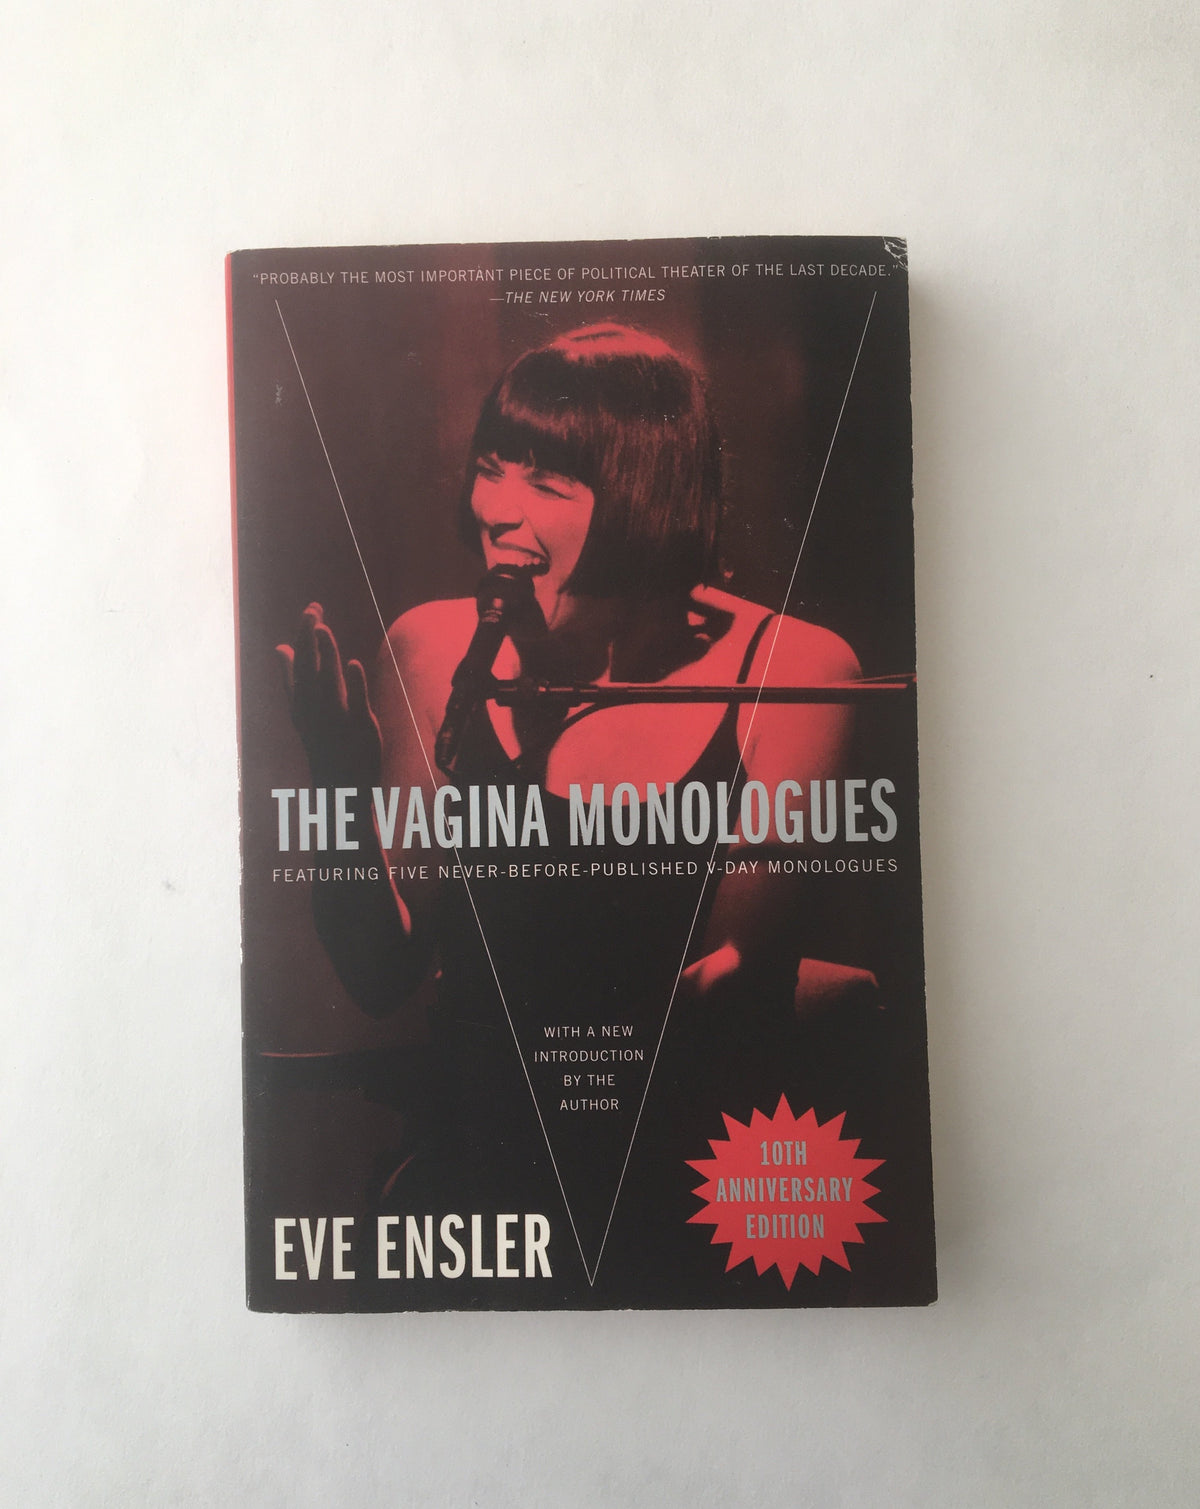 DONATE: The Vagina Monologues by Eve Ensler